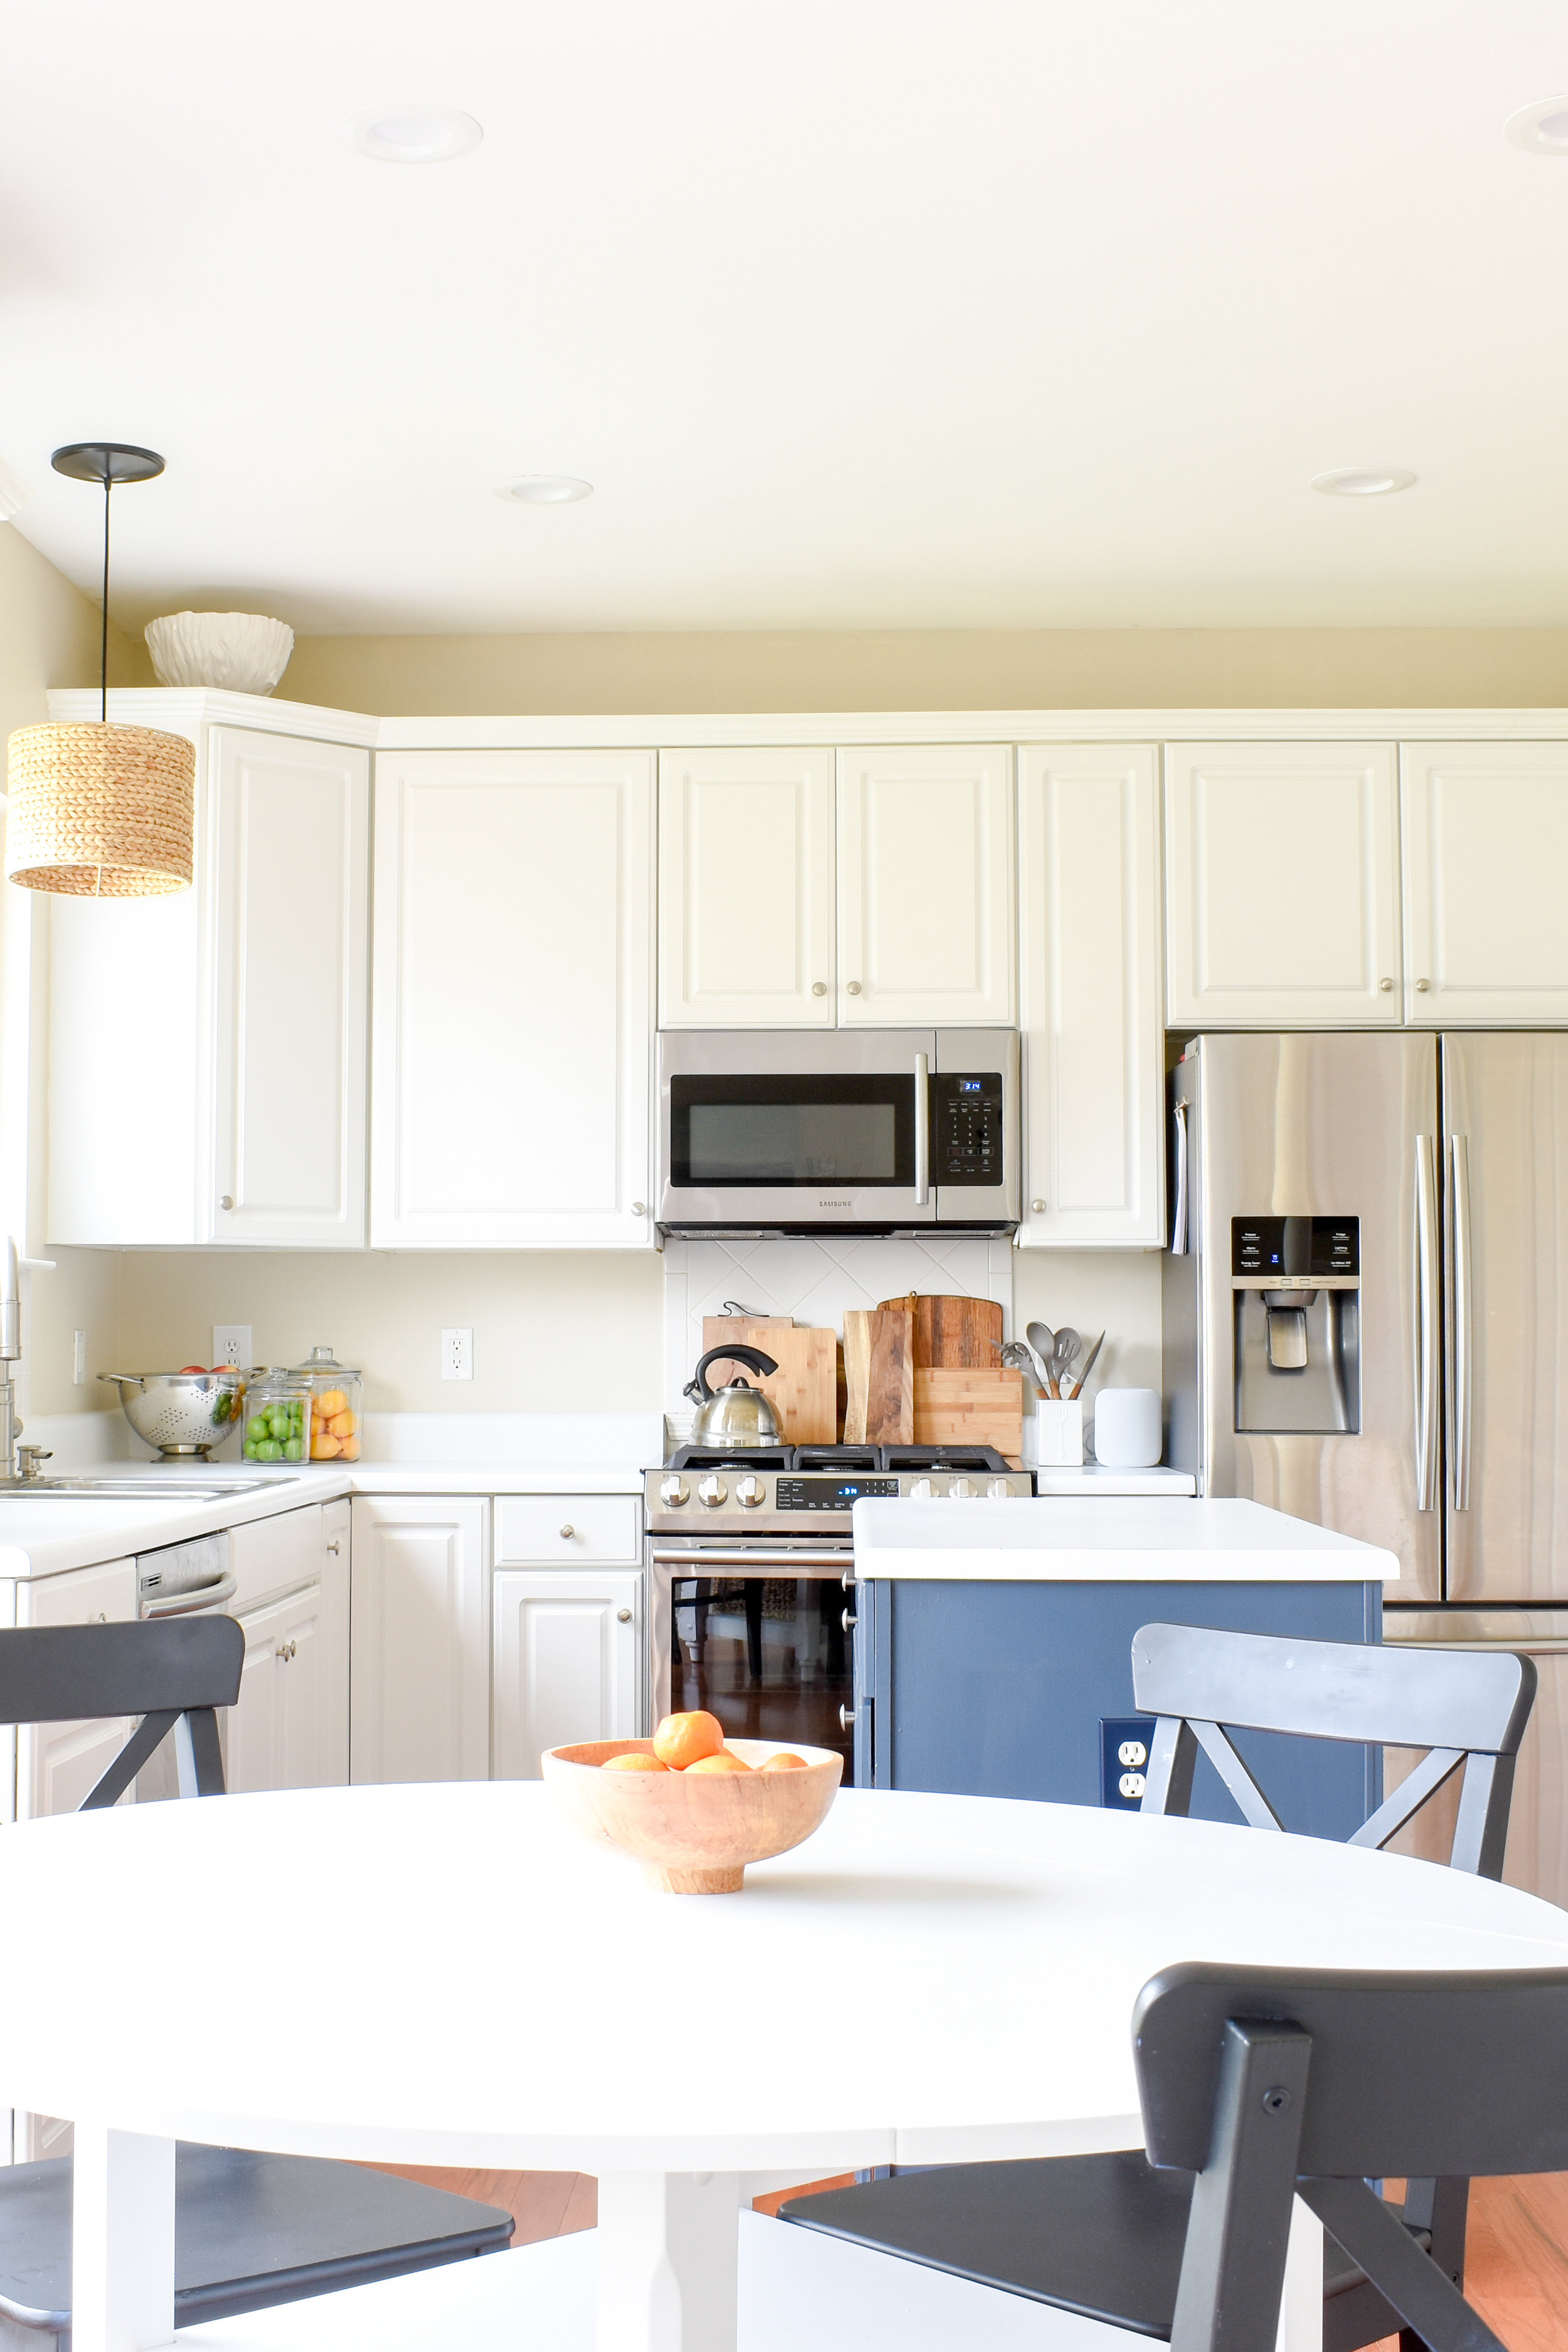 Budget Kitchen Makeover: We've already made great strides in our own kitchen and we haven't replaced any cabinets, counters, or the backsplash! #kitchenideas #whitekitchen #updatedkitchen